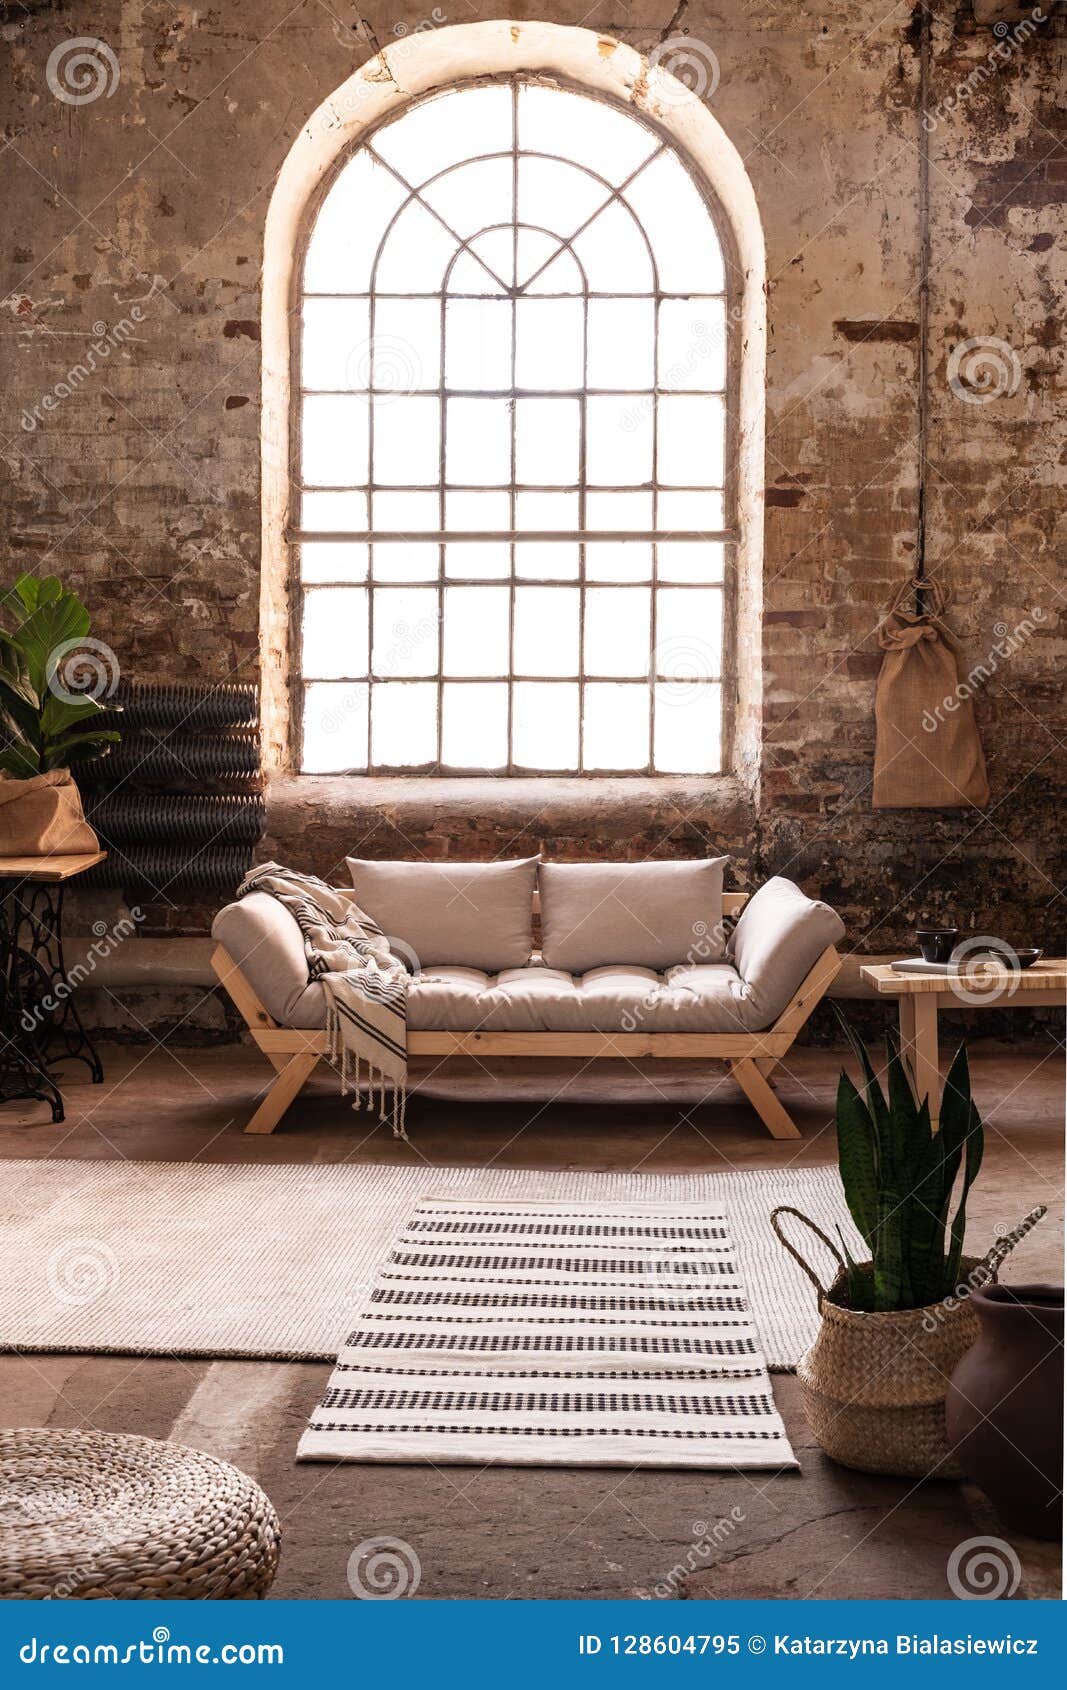 window above grey wooden sofa in spacious loft interior in wabi sabi style with plant and carpet